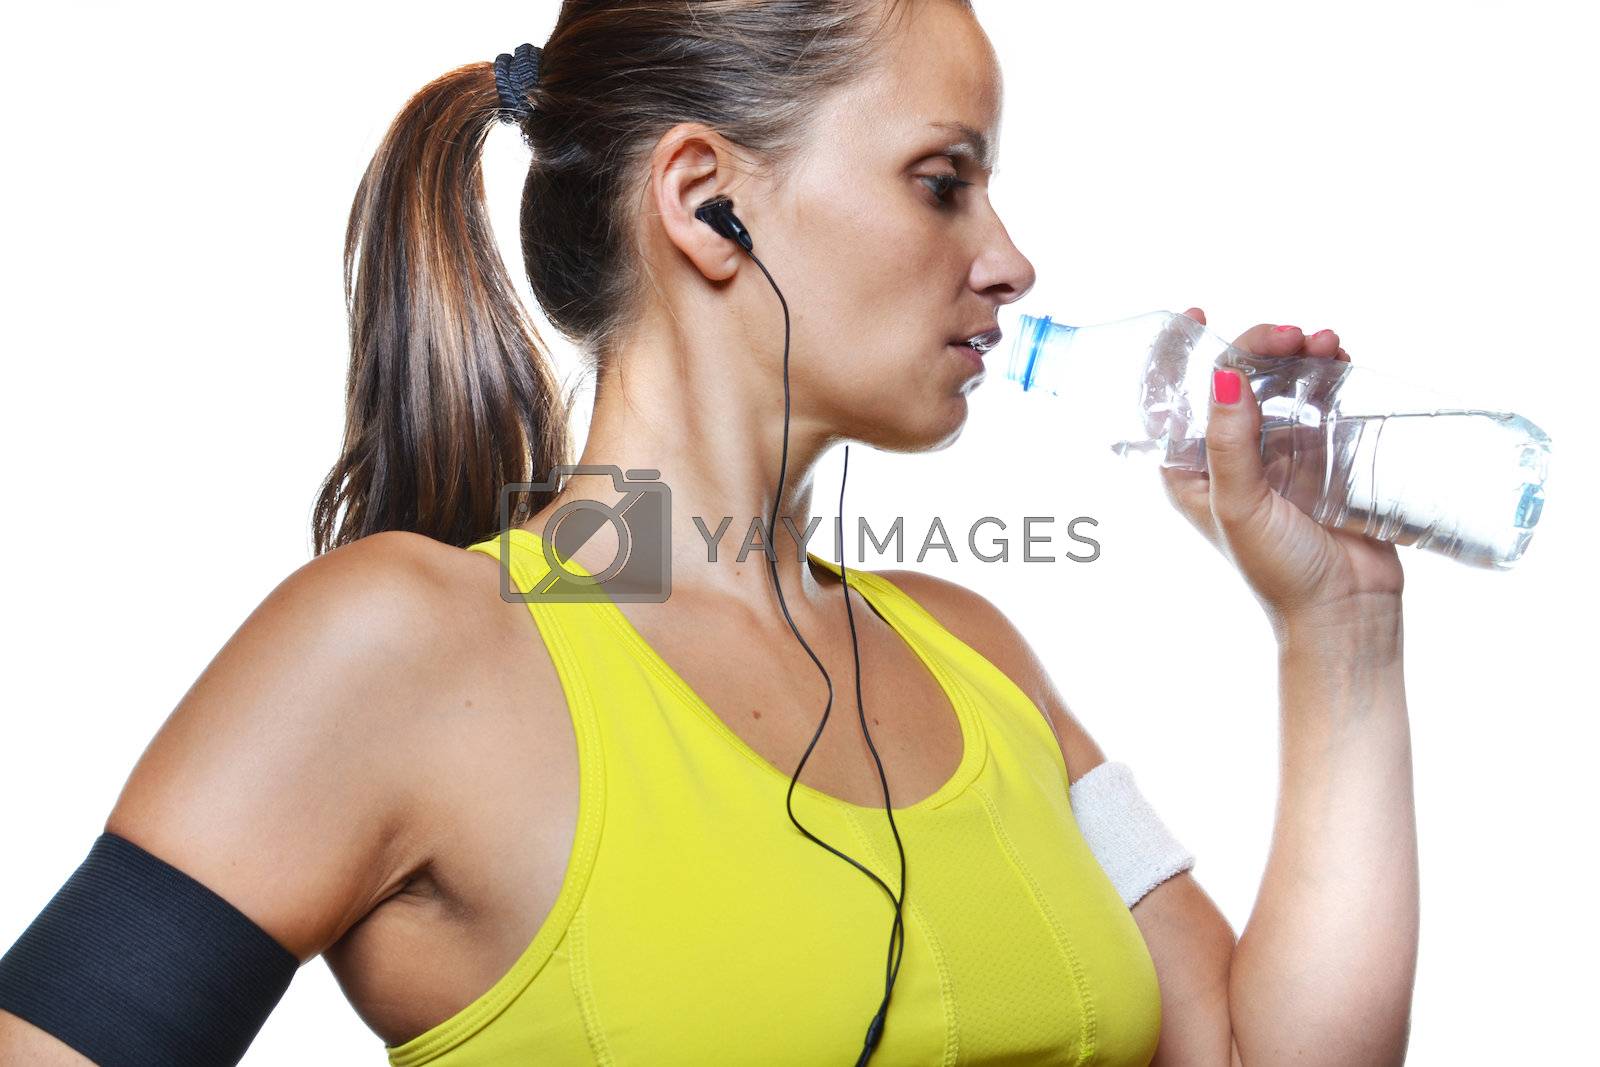 Royalty free image of fitness woman by studio1901